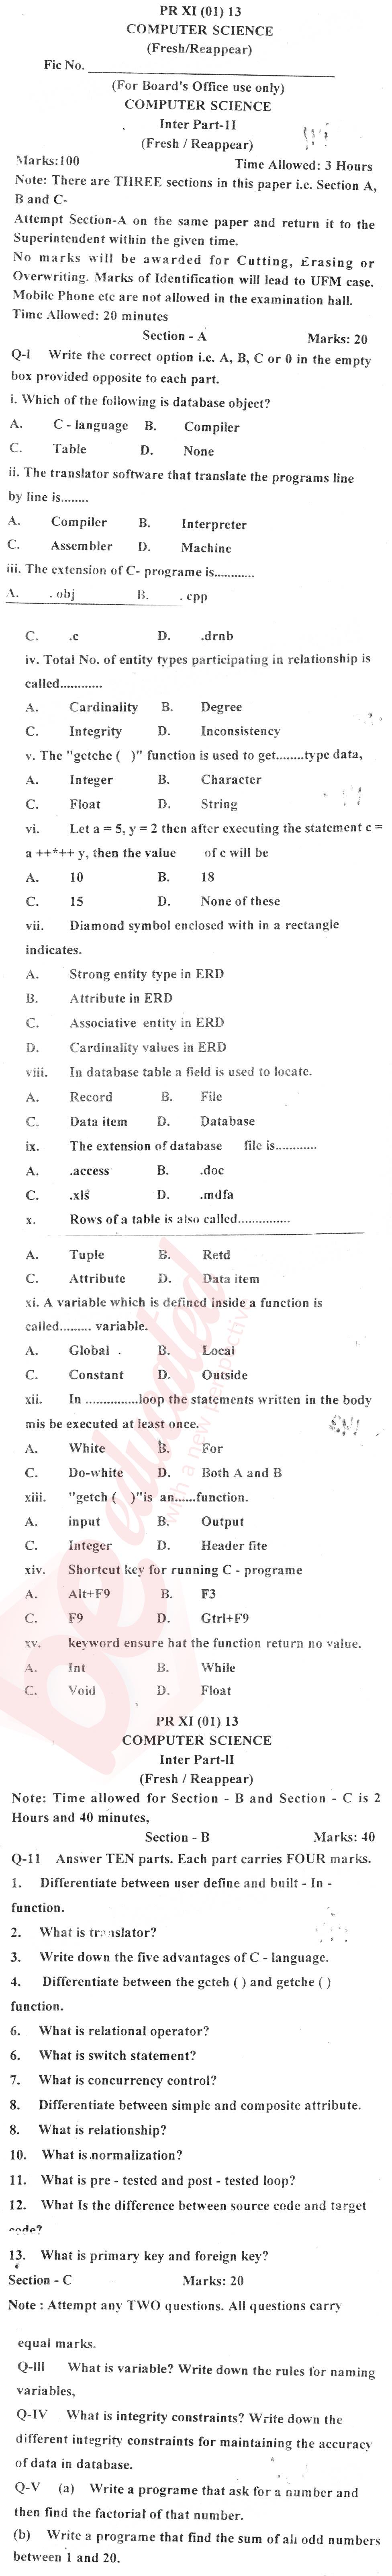 Computer Science FA Part 2 Past Paper Group 1 BISE Swat 2013